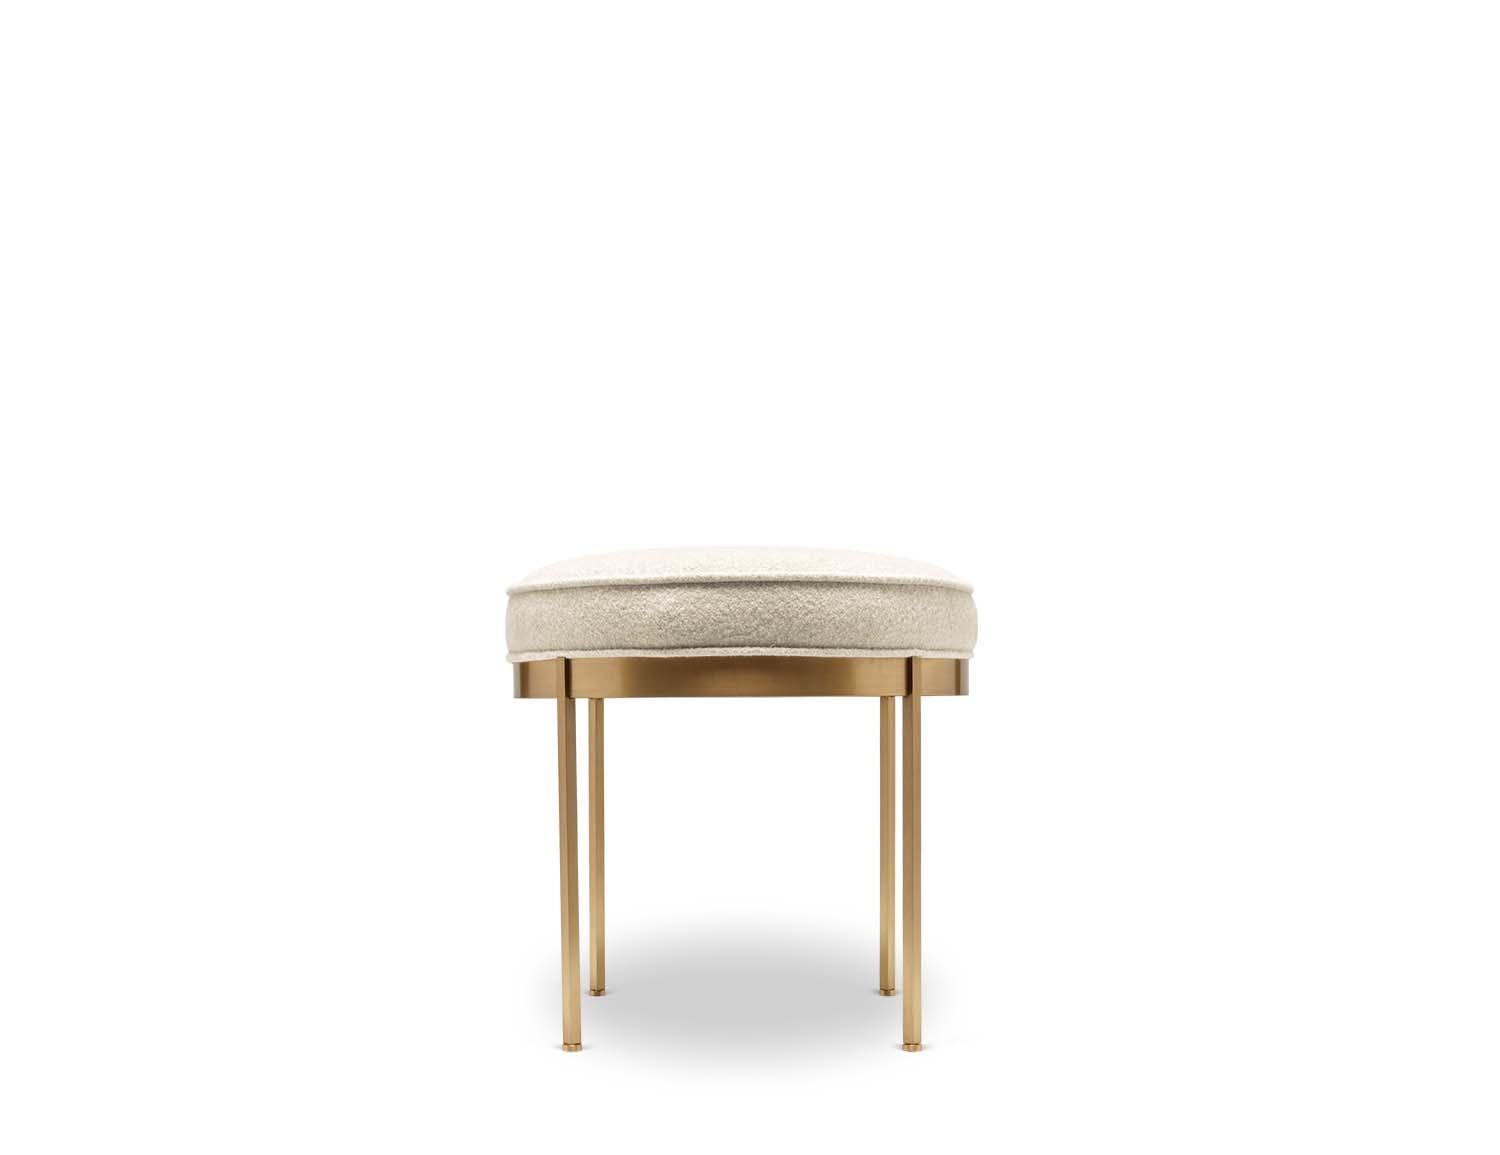 The Petite Paul ottoman features a round solid lacquered brass base and an upholstered seat with piping. Each leg features a rounded leveler. 

The Lawson-Fenning Collection is designed and handmade in Los Angeles, California. Reach out to discover